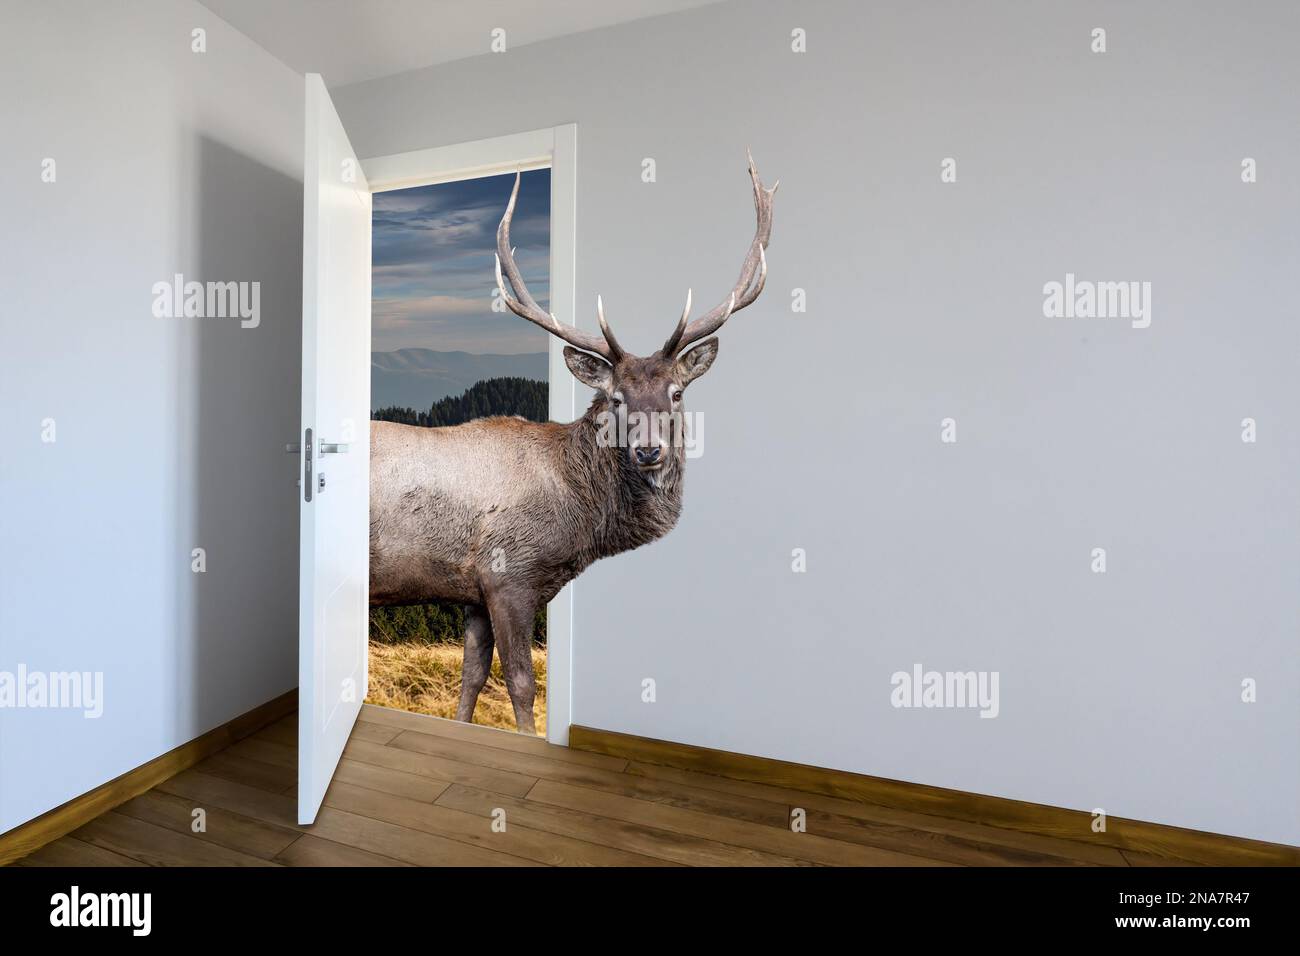 Deer entering a door. Animal watching from a wall. Kids decoration room. Сhild's imagination or a dream Stock Photo